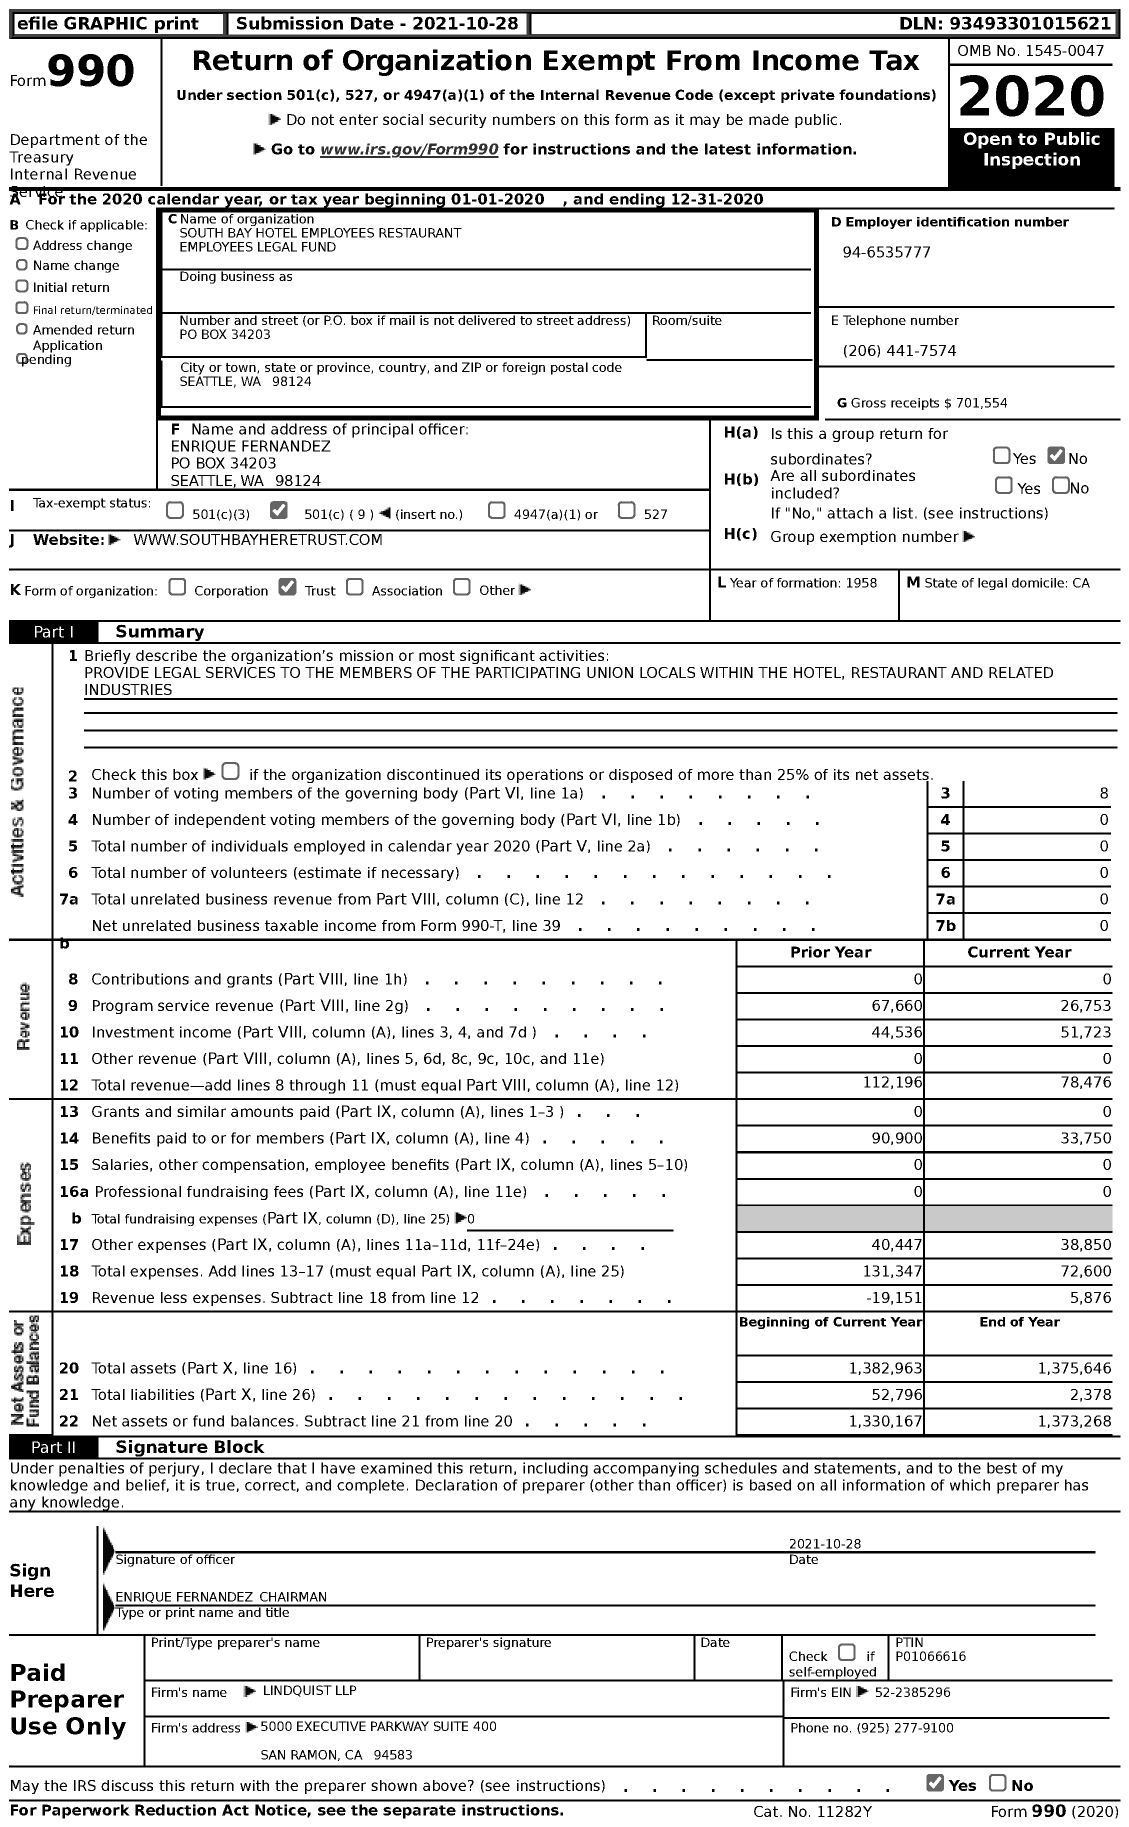 Image of first page of 2020 Form 990 for South Bay Hotel Employees Restaurant Employees Legal Fund